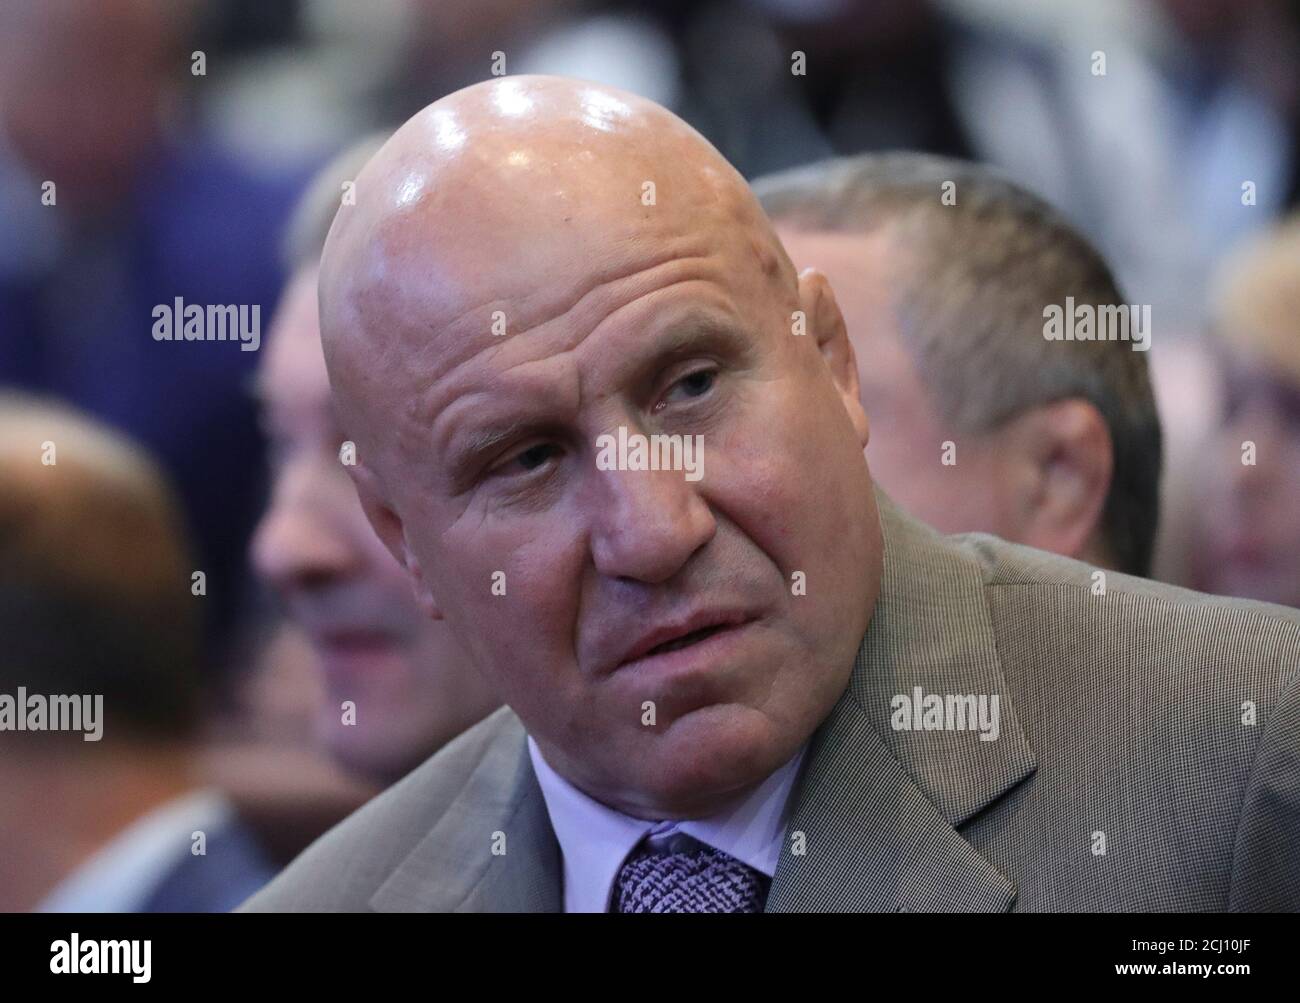 Mikhail Mamiashvili, President of the Russian wrestling federation, attends an annual meeting of the Olympic Committee of Russia with sports federations, academies, member organizations, coaches and athletes in Moscow, Russia November 28, 2019. REUTERS/Evgenia Novozhenina Stock Photo